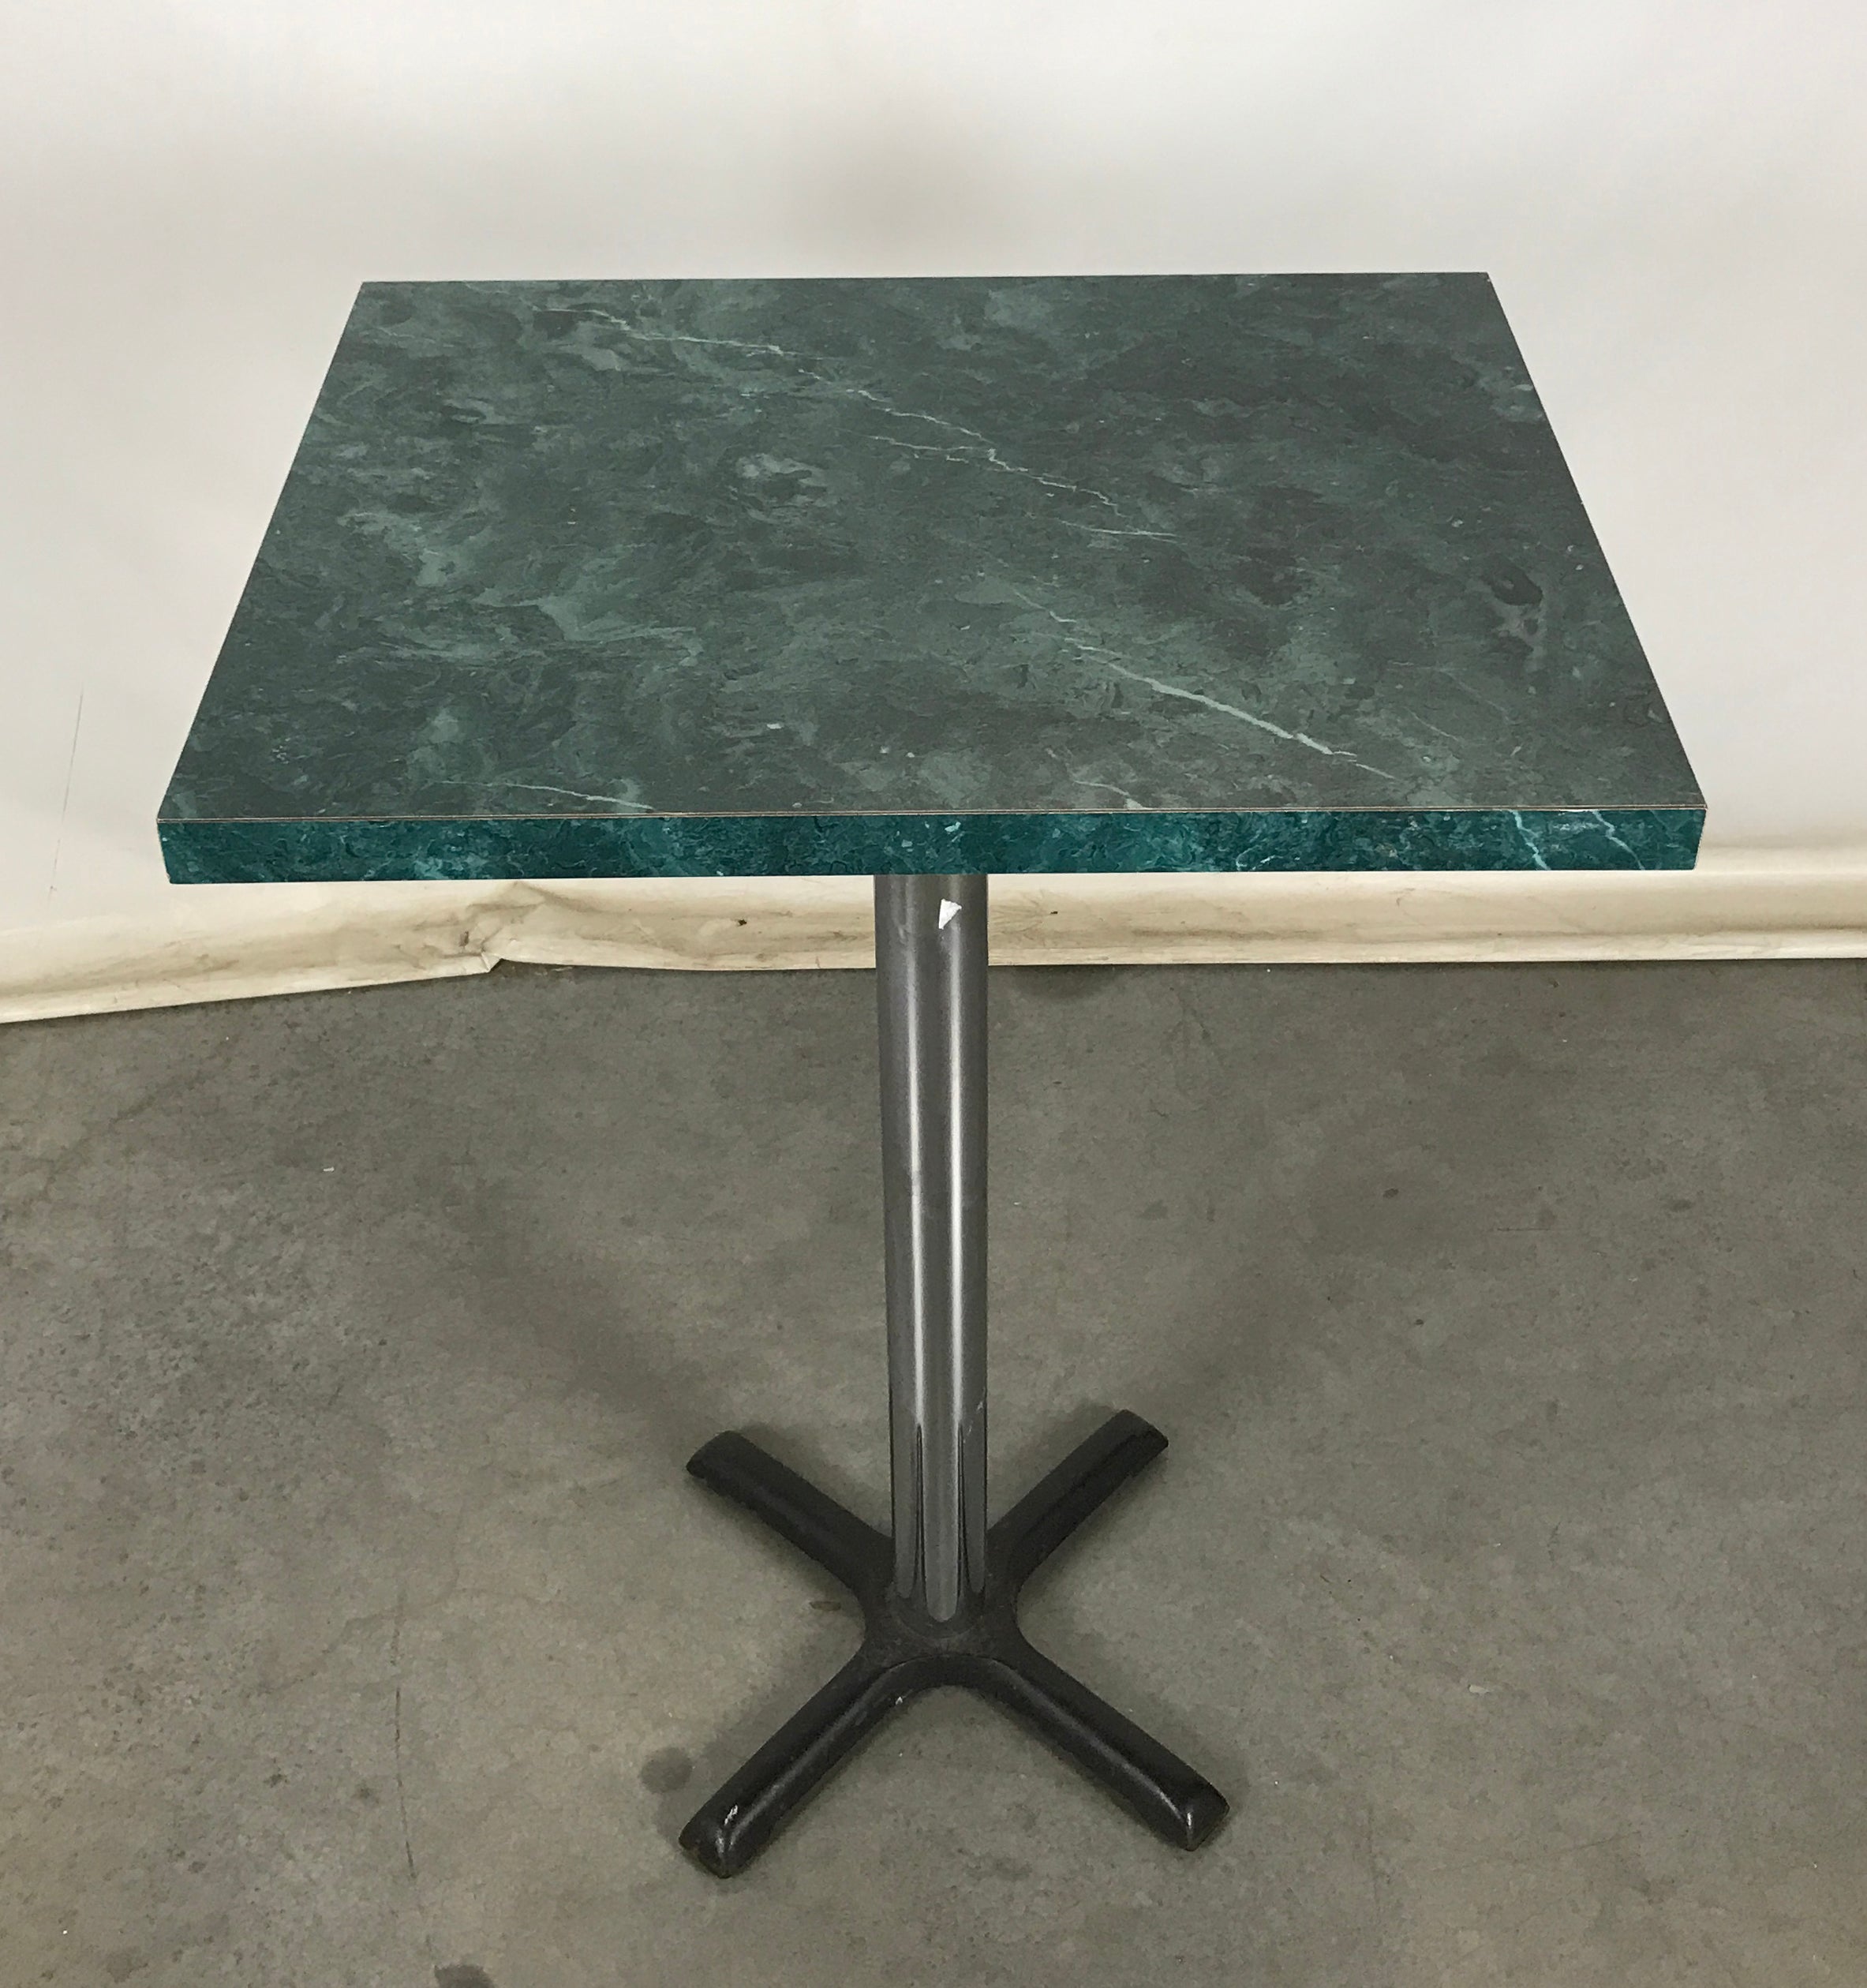 Tall Green Table